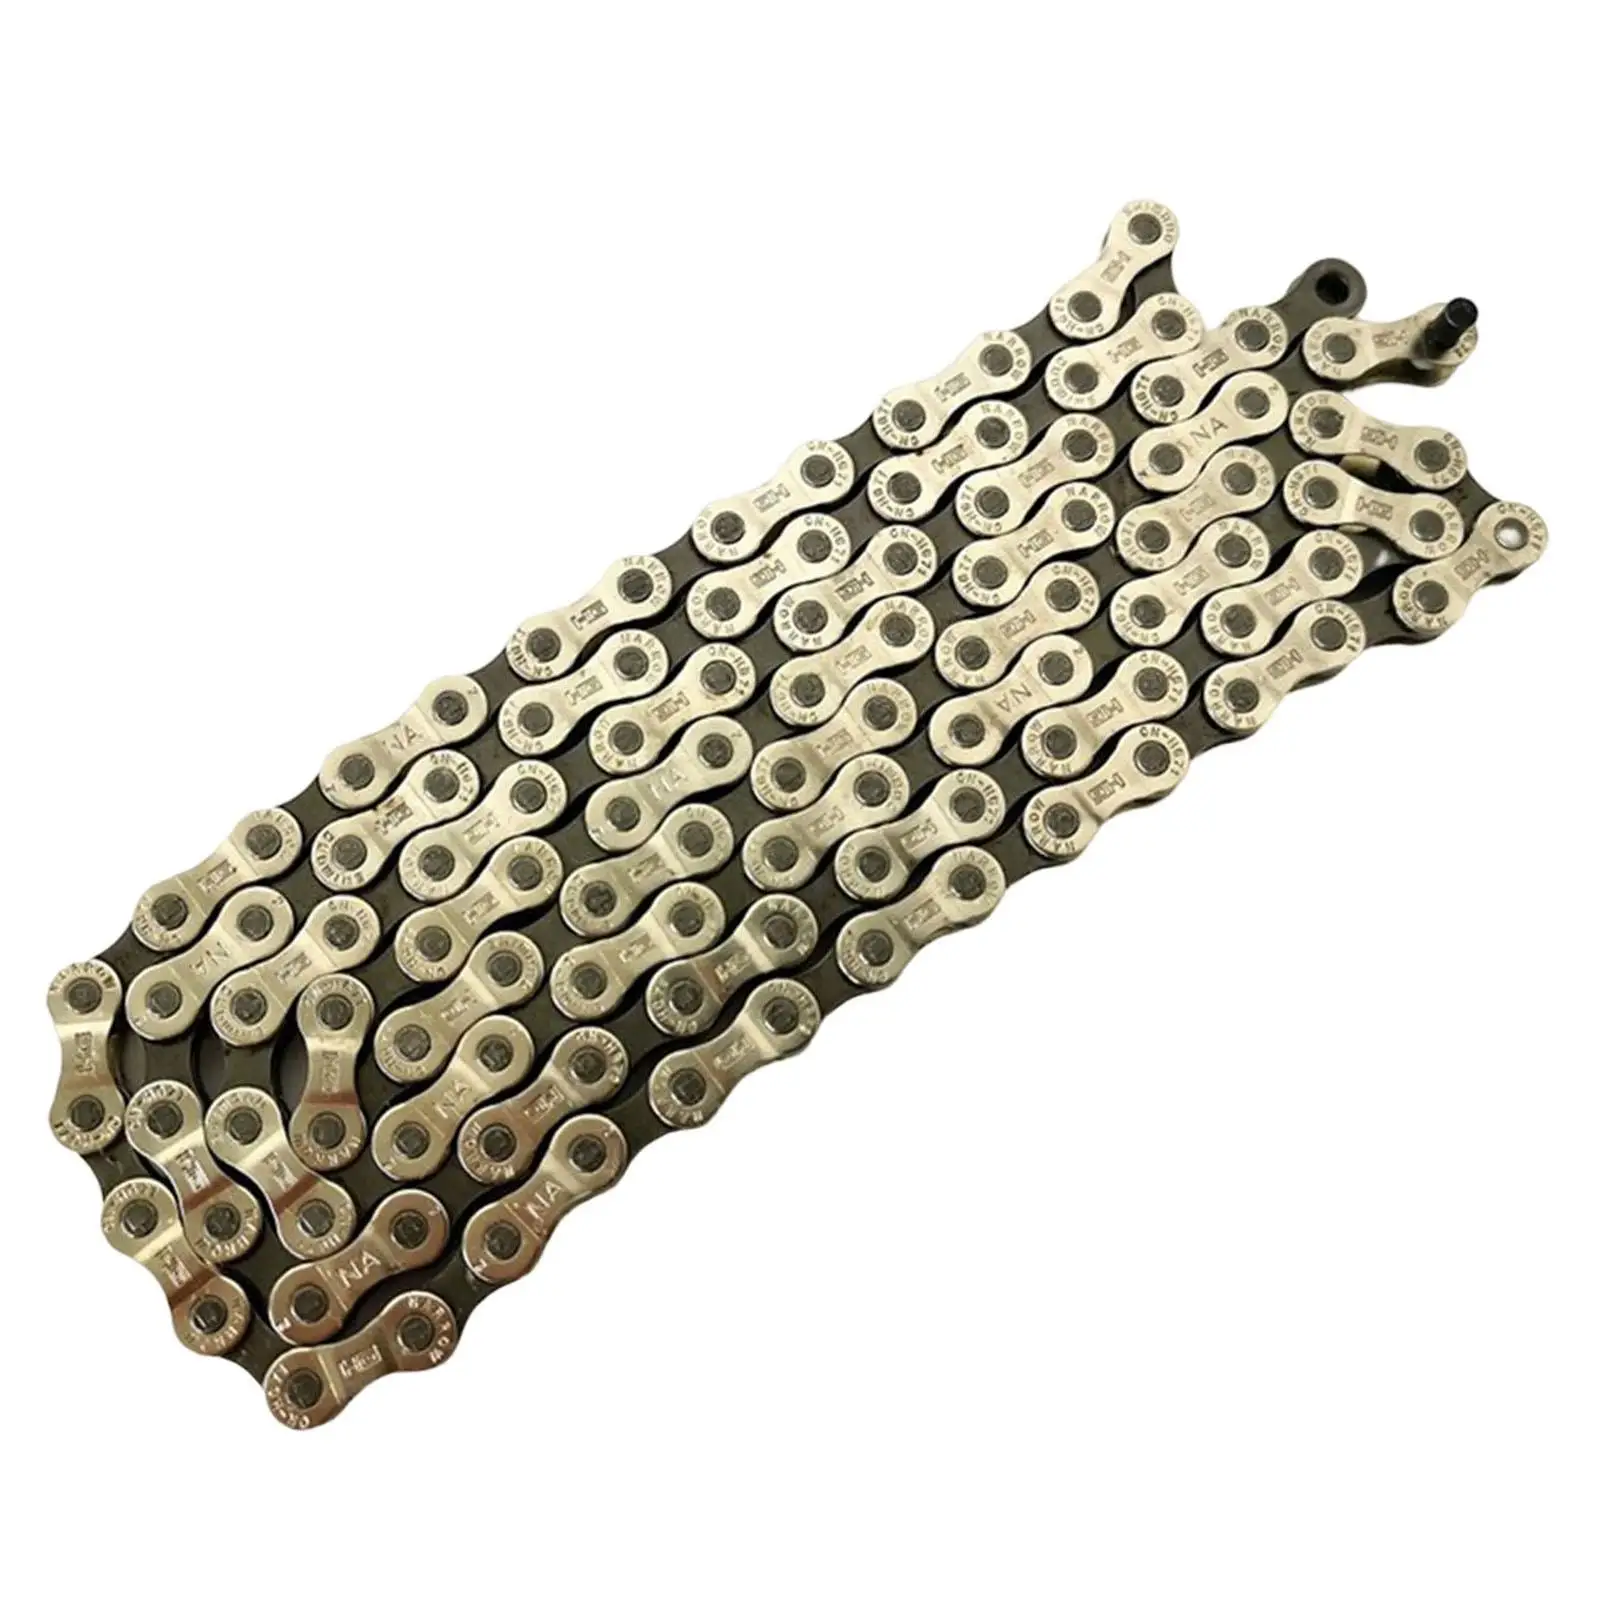 MTB Bicycle Chain Universal 112 Links 6/7/8 Speeds Chains Replacement Repair